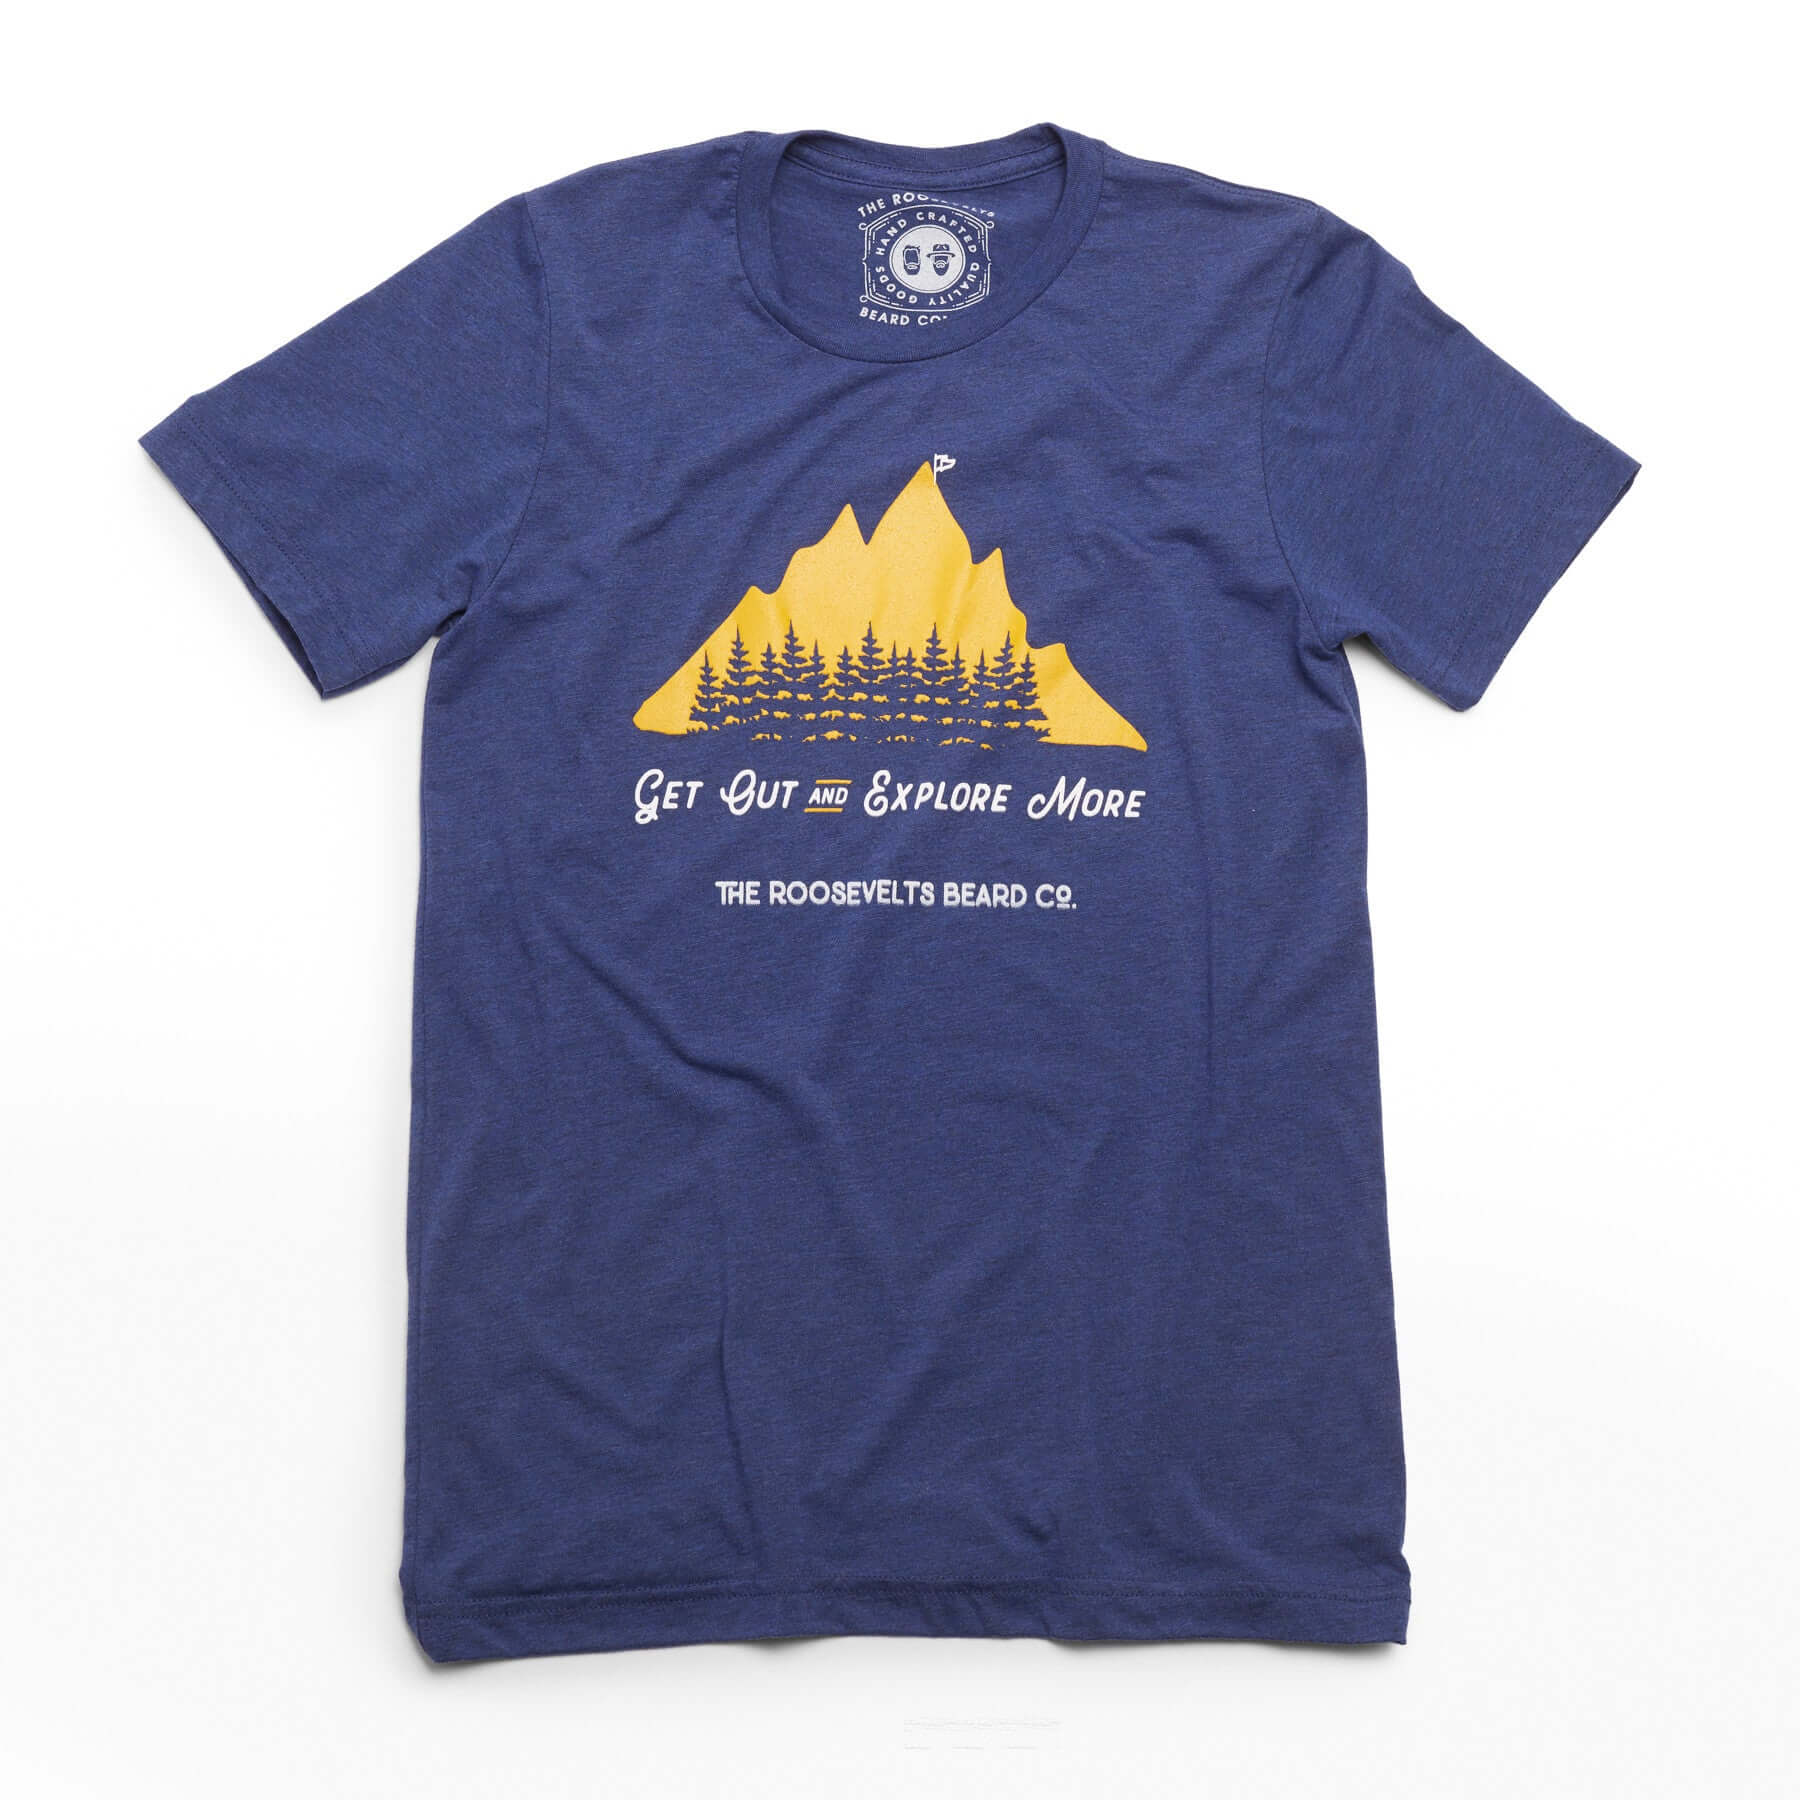 "Get Out and Explore More" shirt - Roosevelt Supply Co.